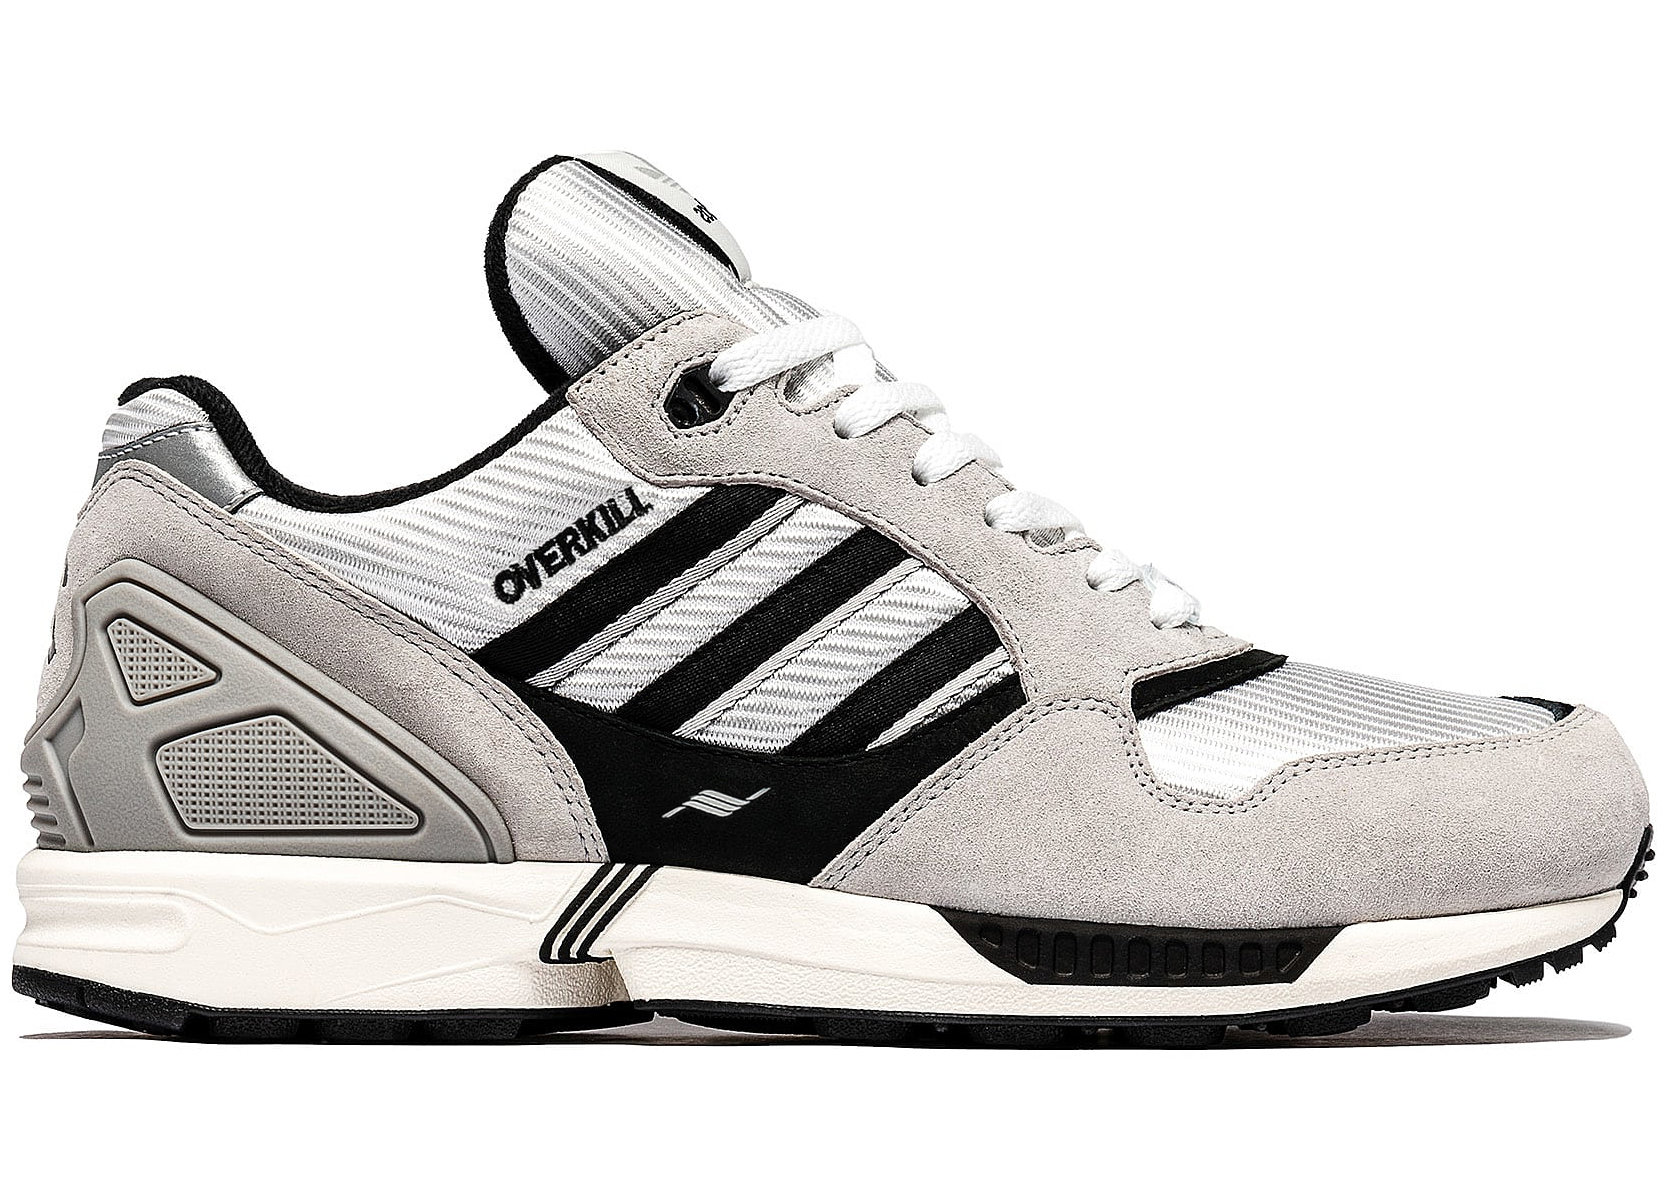 adidas ZX 6000 Overkill Friends and Family